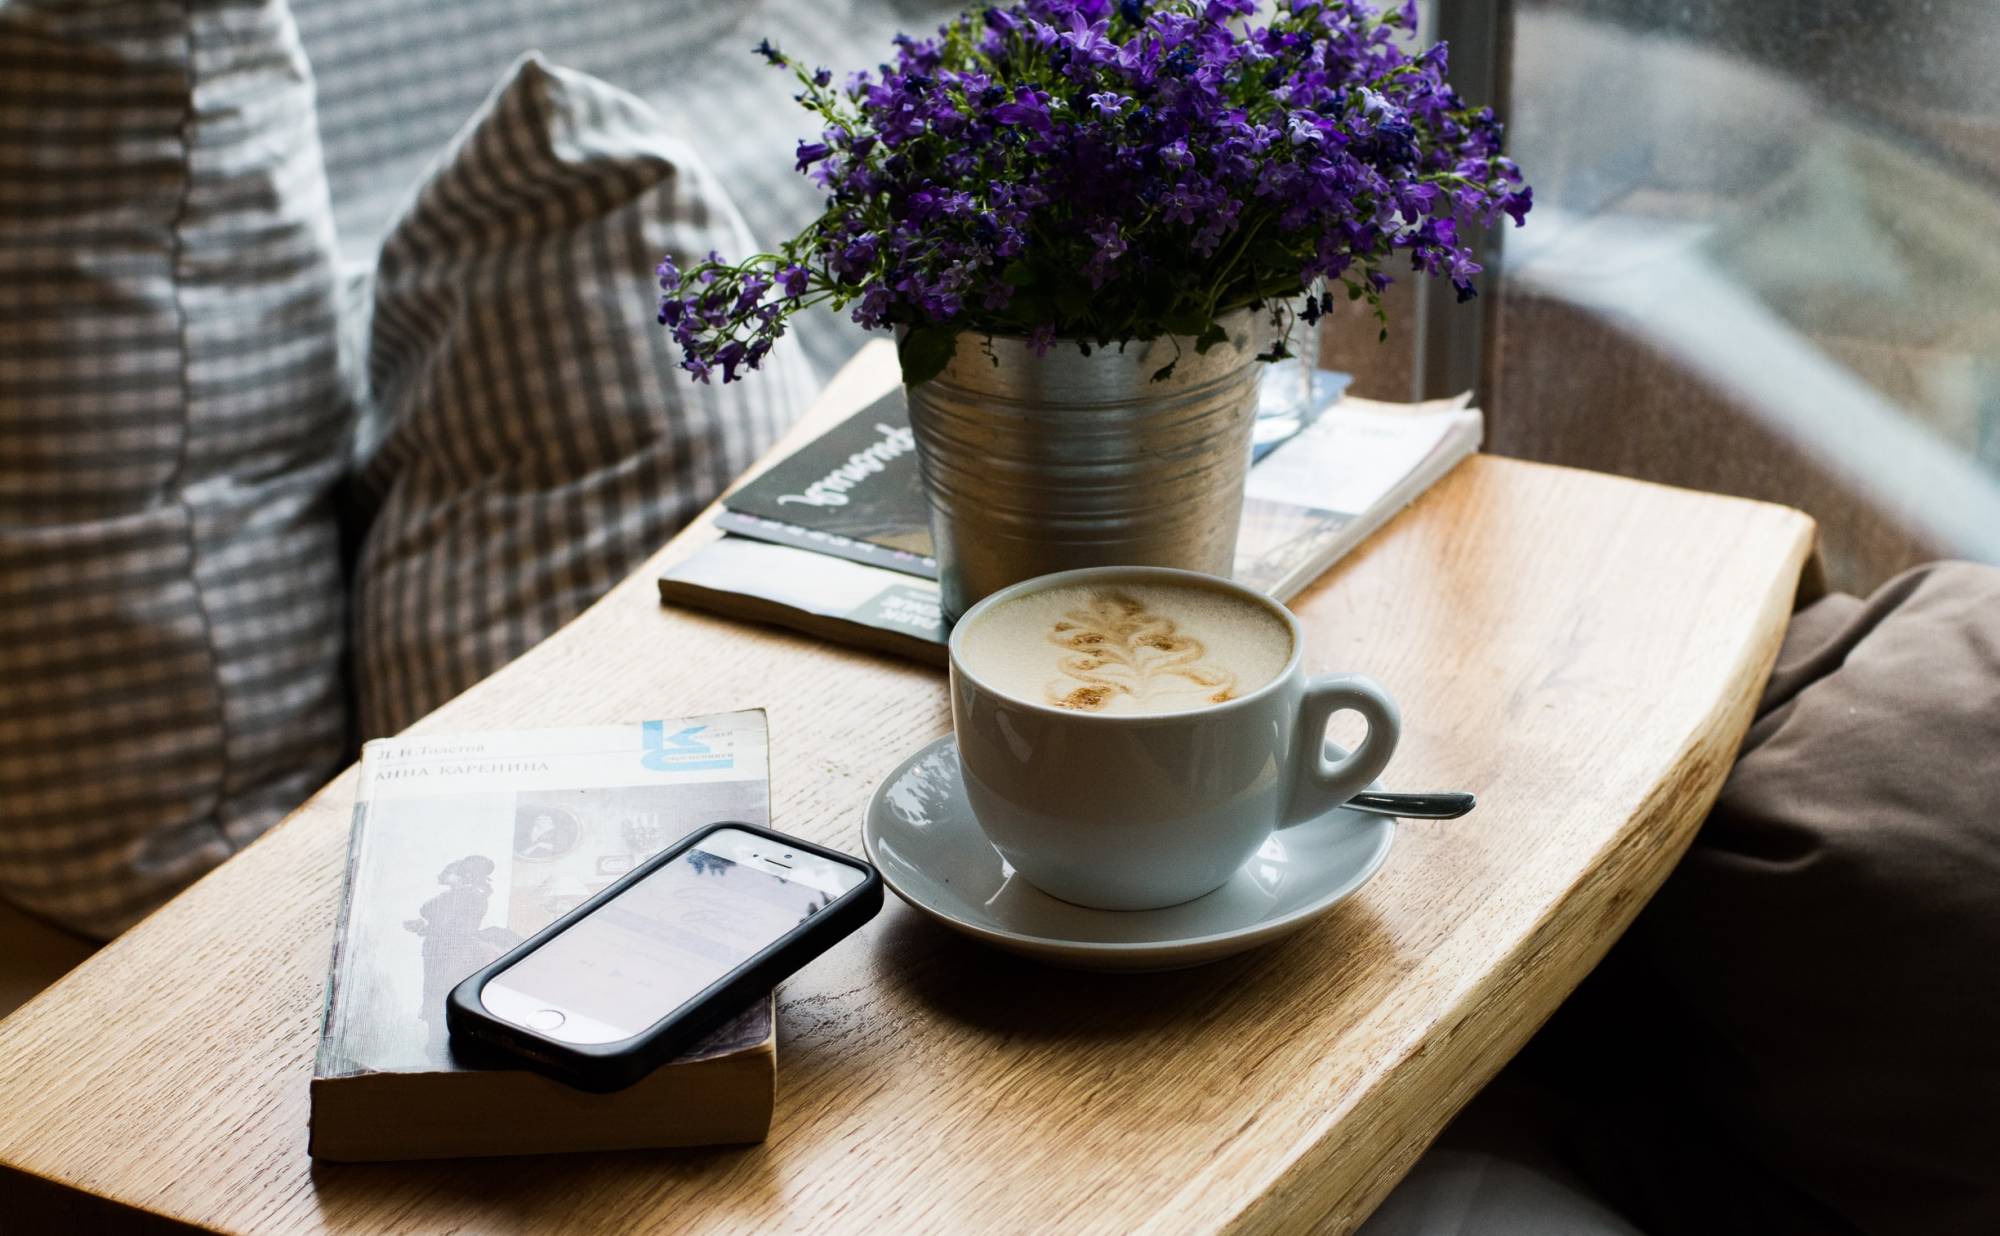 A coffee table with a book, phone and cup of coffee